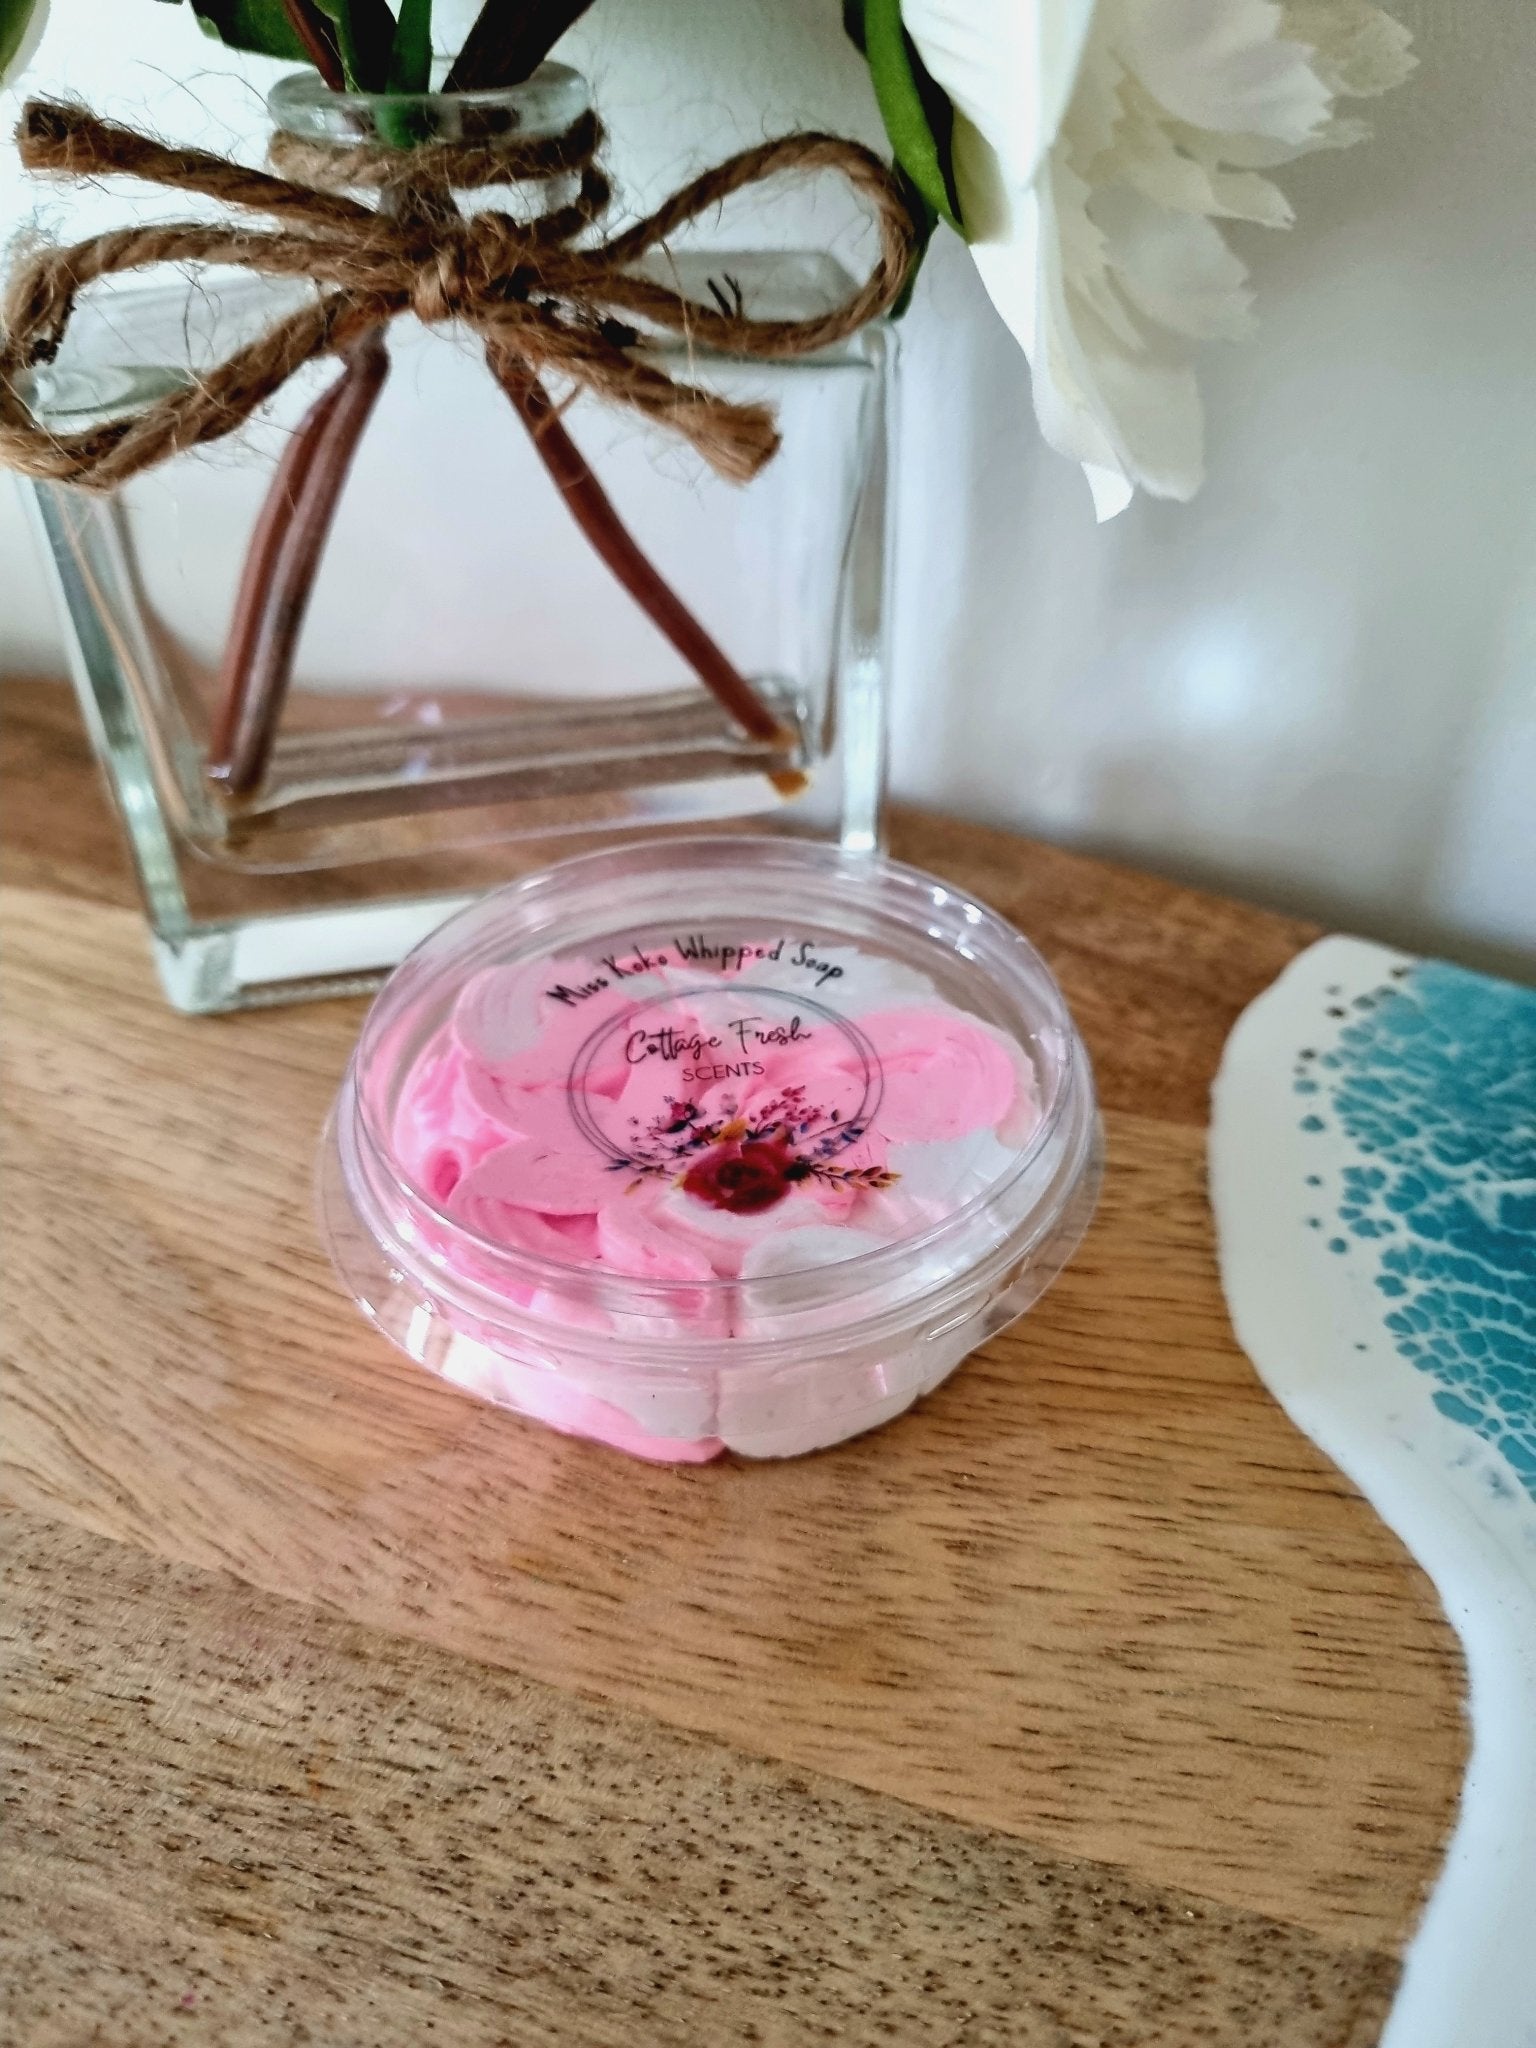 Miss Koko Whipped Soap - Whipped Soap - Cottage Fresh Scents